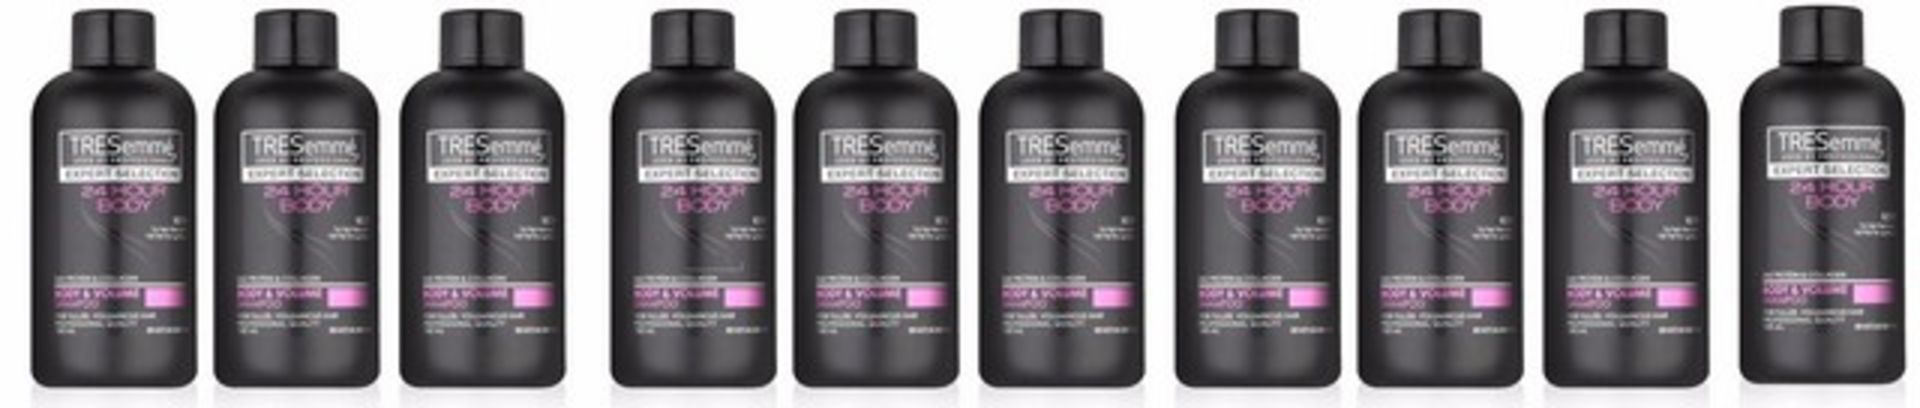 V Grade A A Lot Of Ten 100ml Bottles TRESemme 24 Hour Body Shampoo Builds Body & Volume With Silk